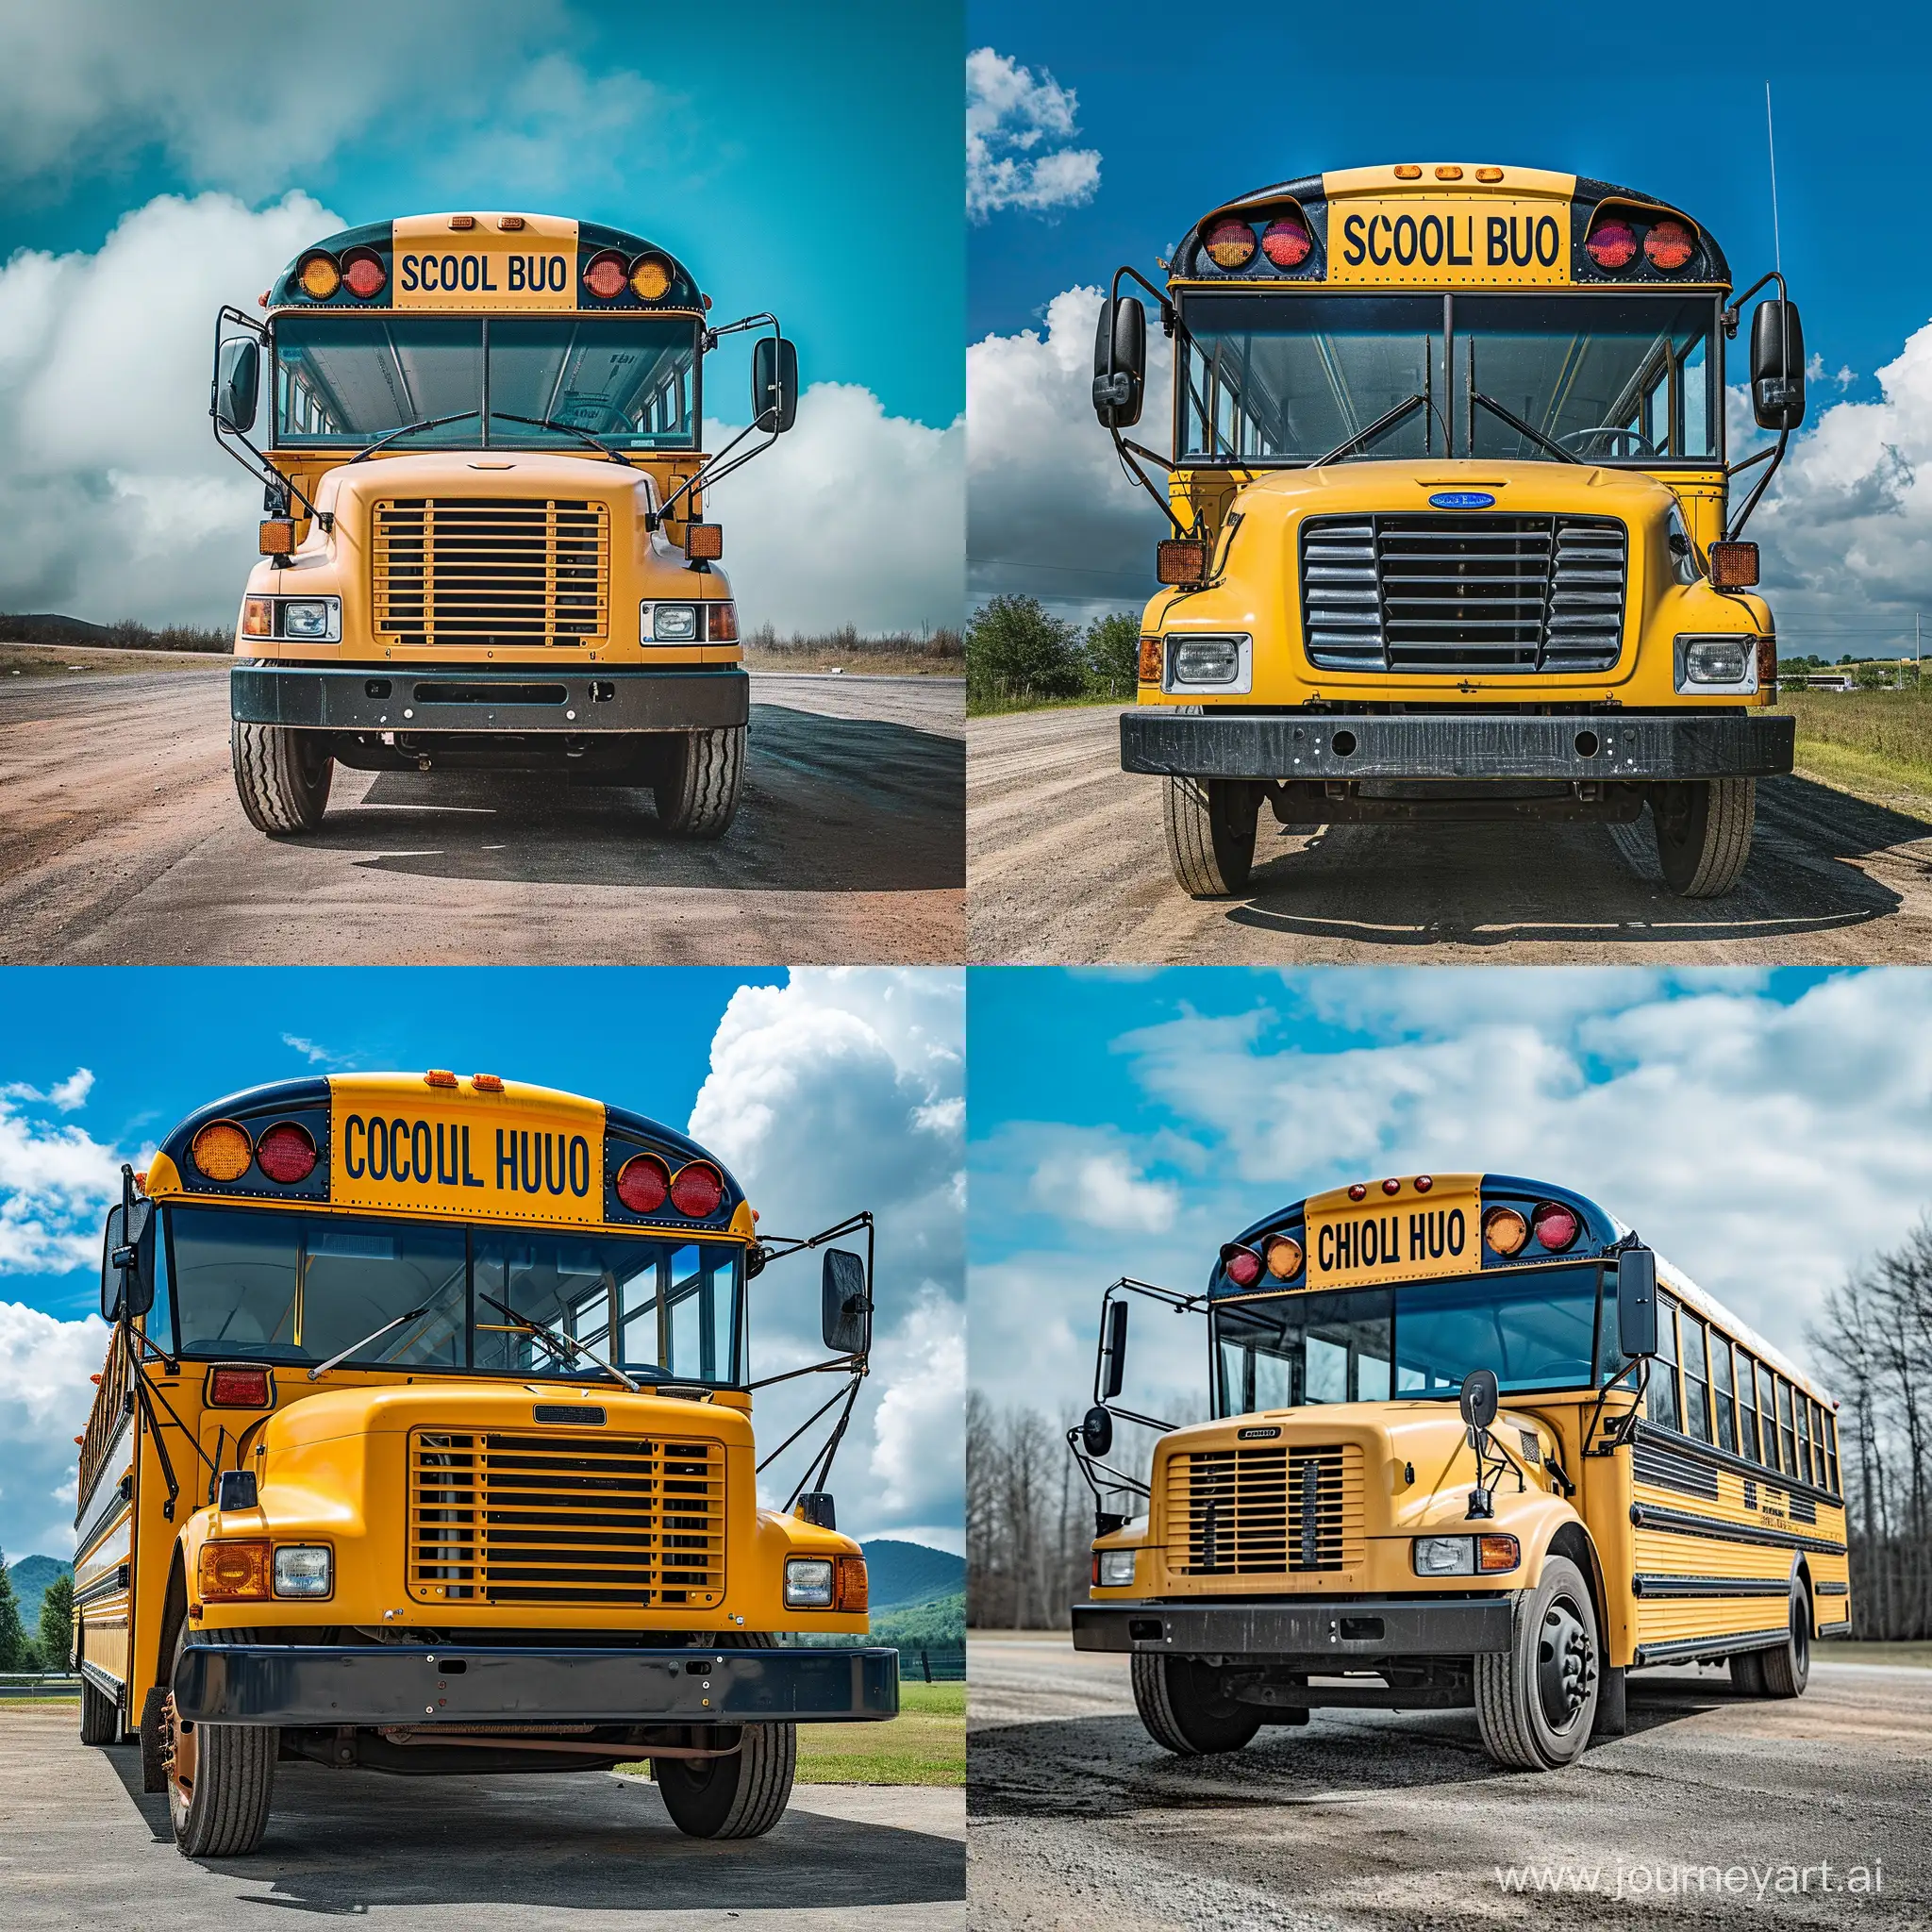 A yellow American school bus parked outdoors with its front facing towards the viewer.